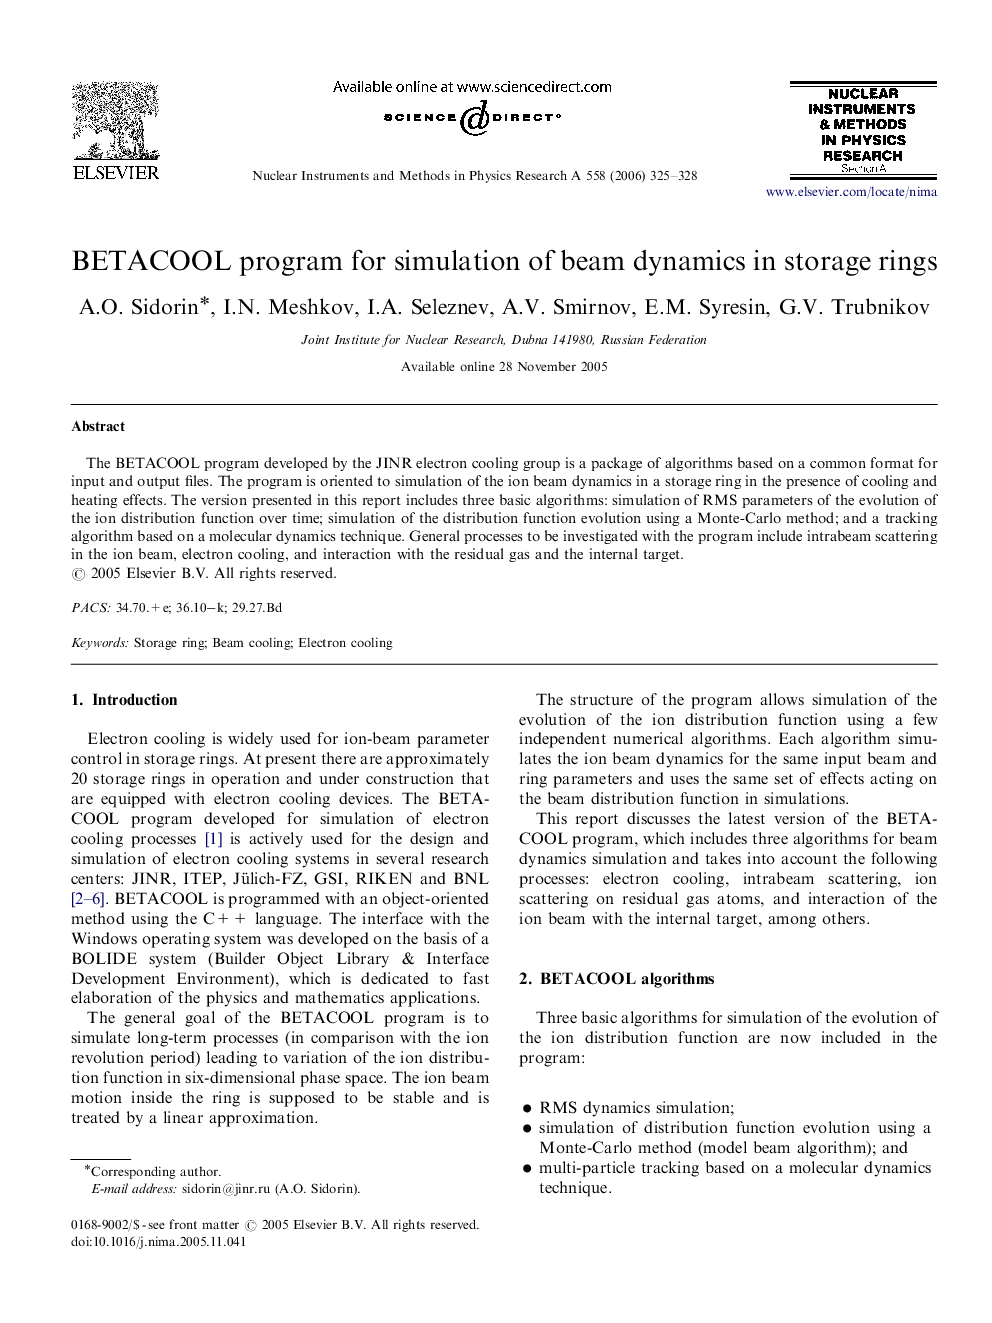 BETACOOL program for simulation of beam dynamics in storage rings